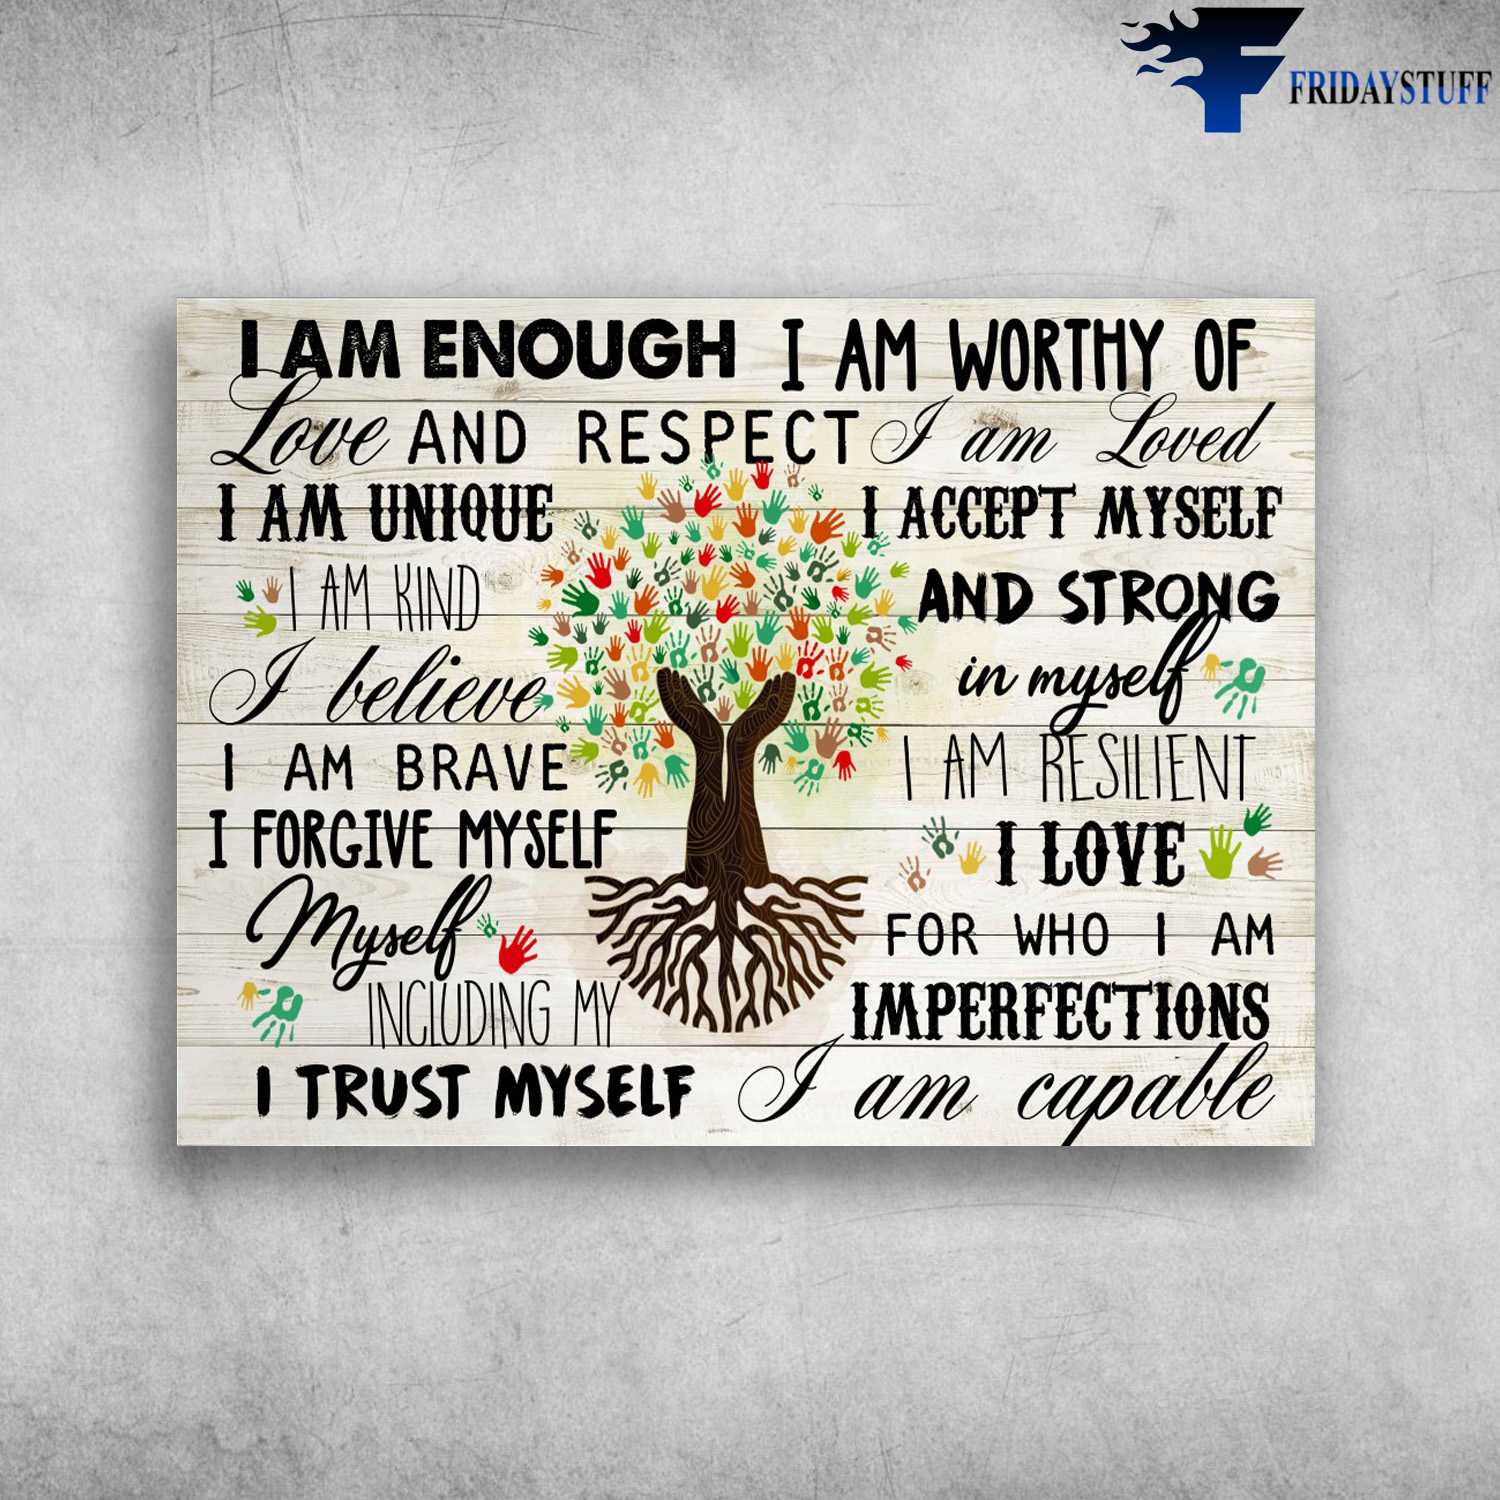 Sicial Worker - I Am Enough, I Am Worthy Of Love And Respect, I Am Loved, I Am Uniqur, I Am King, I Accept Myself, And Strong In Myself